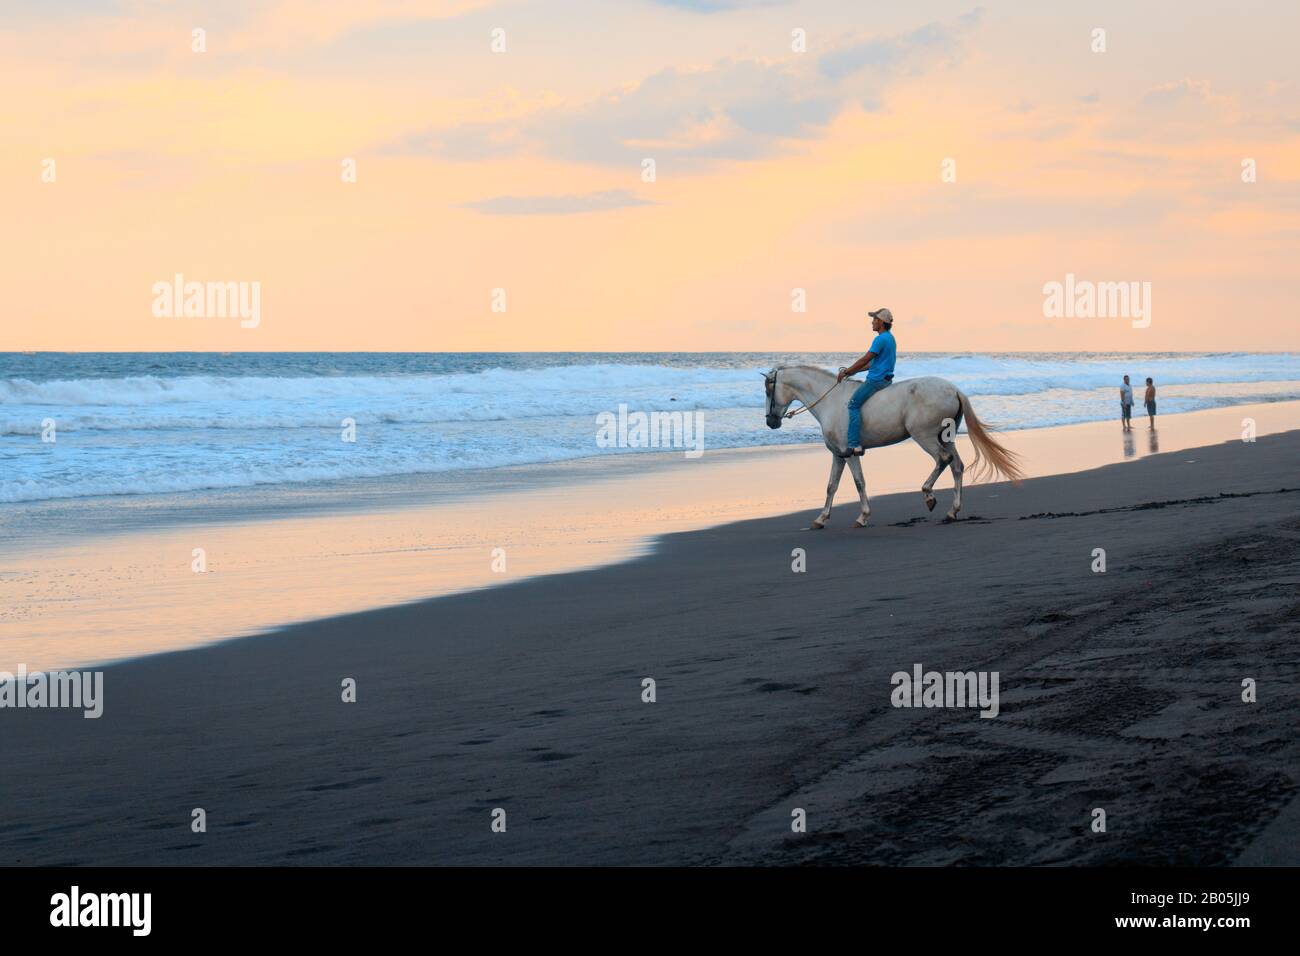 man riding a white horse on the beach during sunset Stock Photo